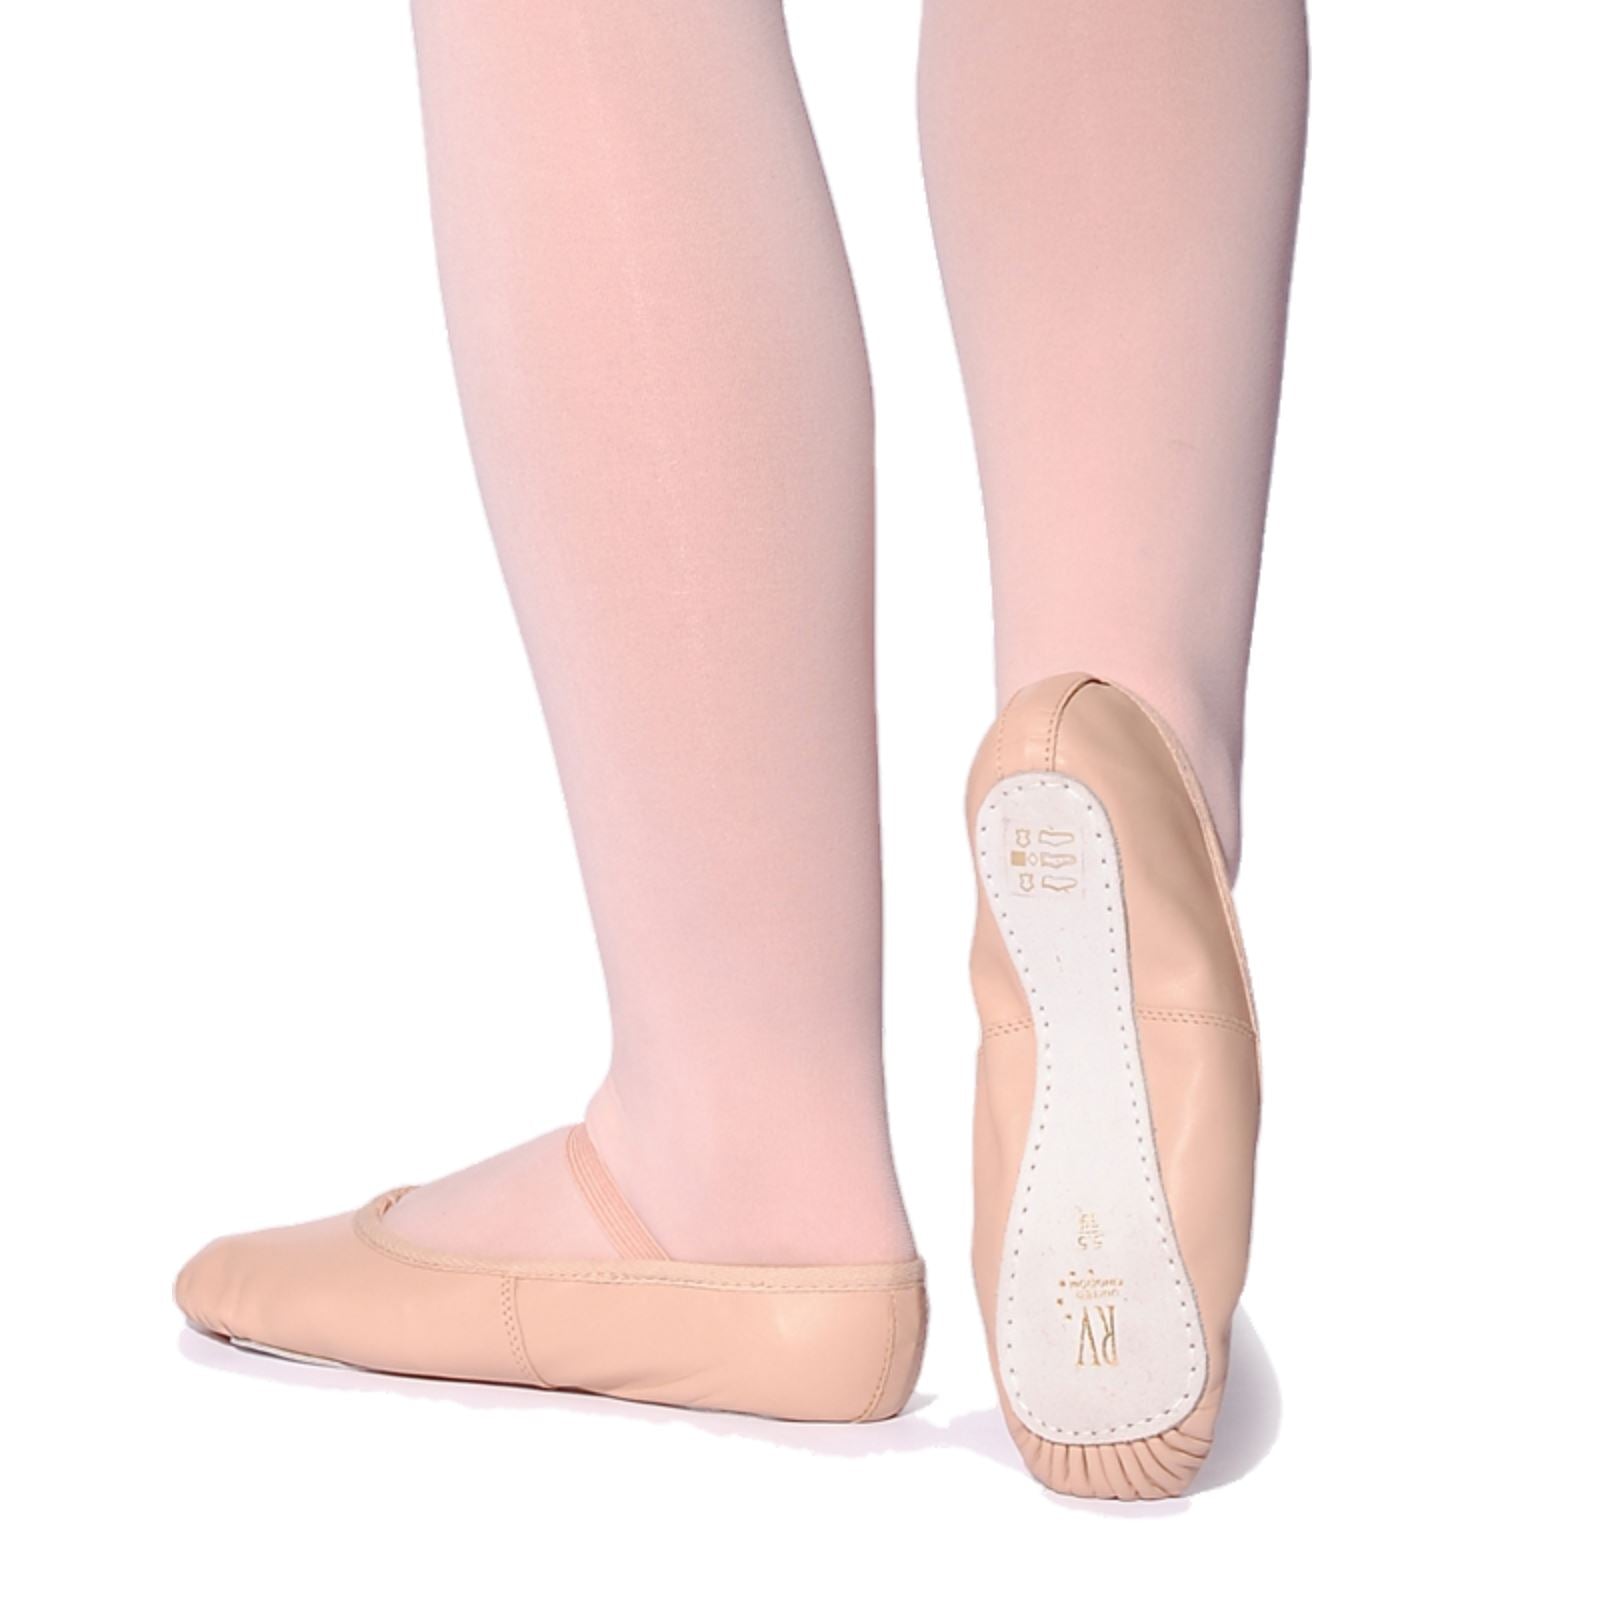 ROCH VALLEY PINK LEATHER OPHELIA BALLET SHOES - PRE SEWN ELASTIC Dance Shoes Roch Valley 